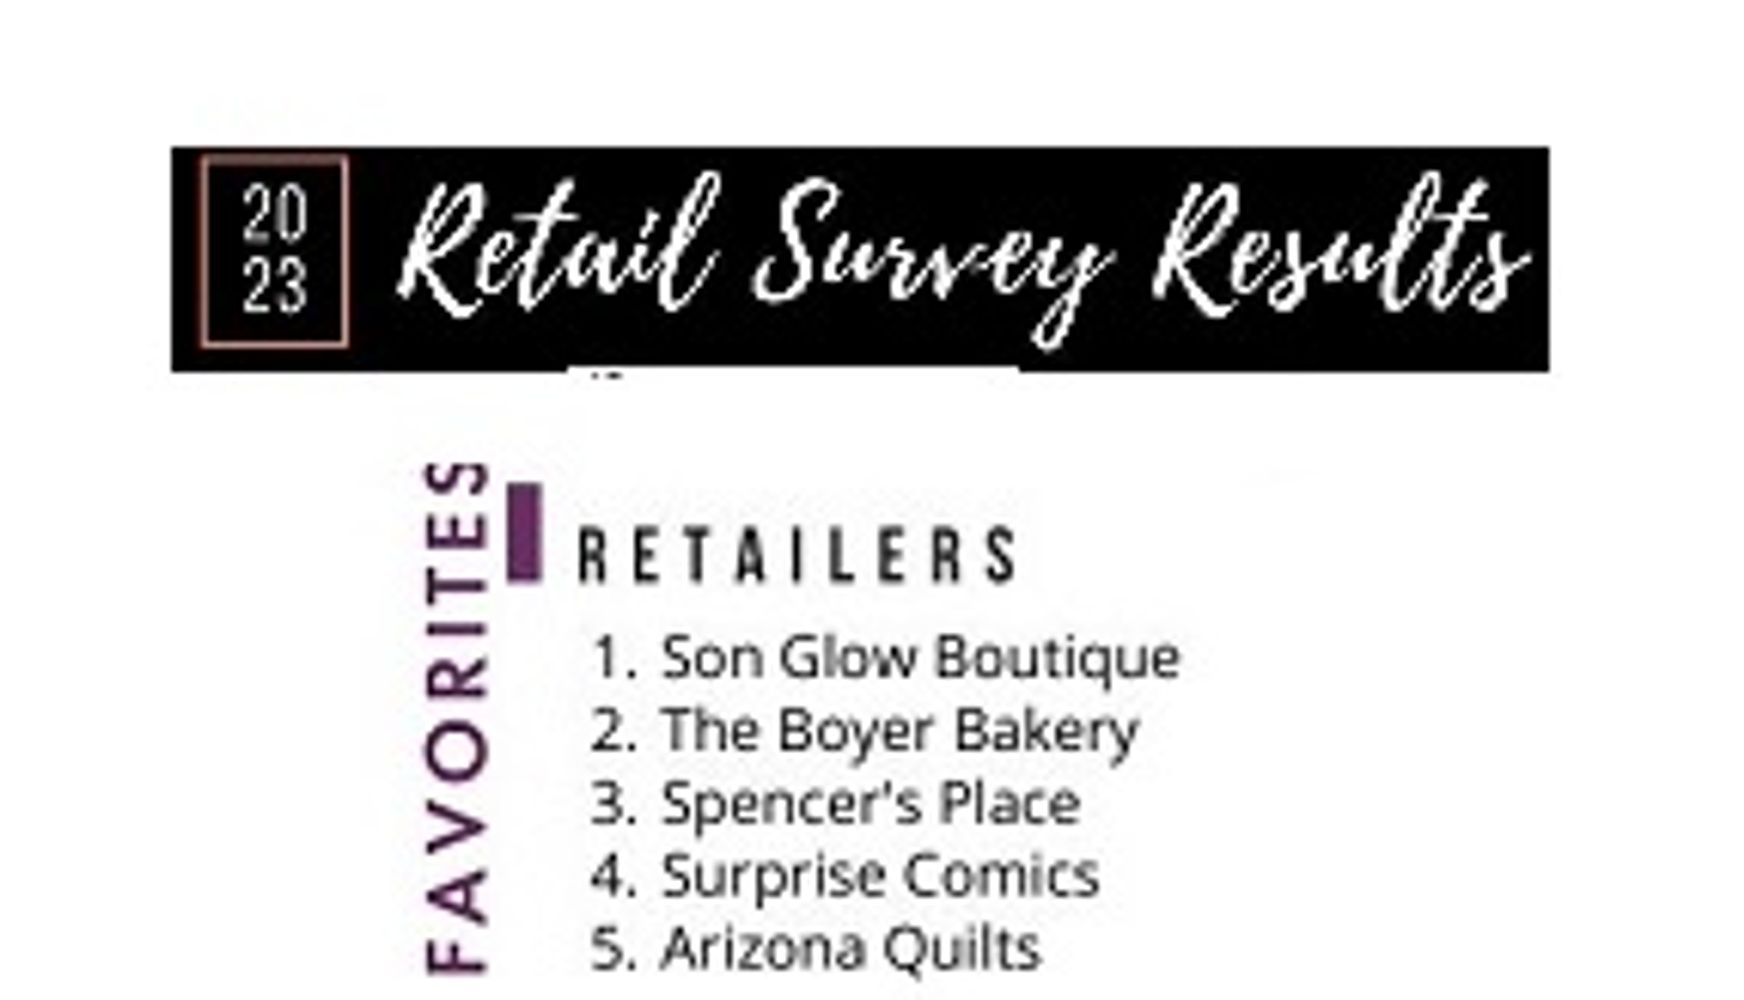 Voted #1 Retailer in Surprise for the 50th year in a row.